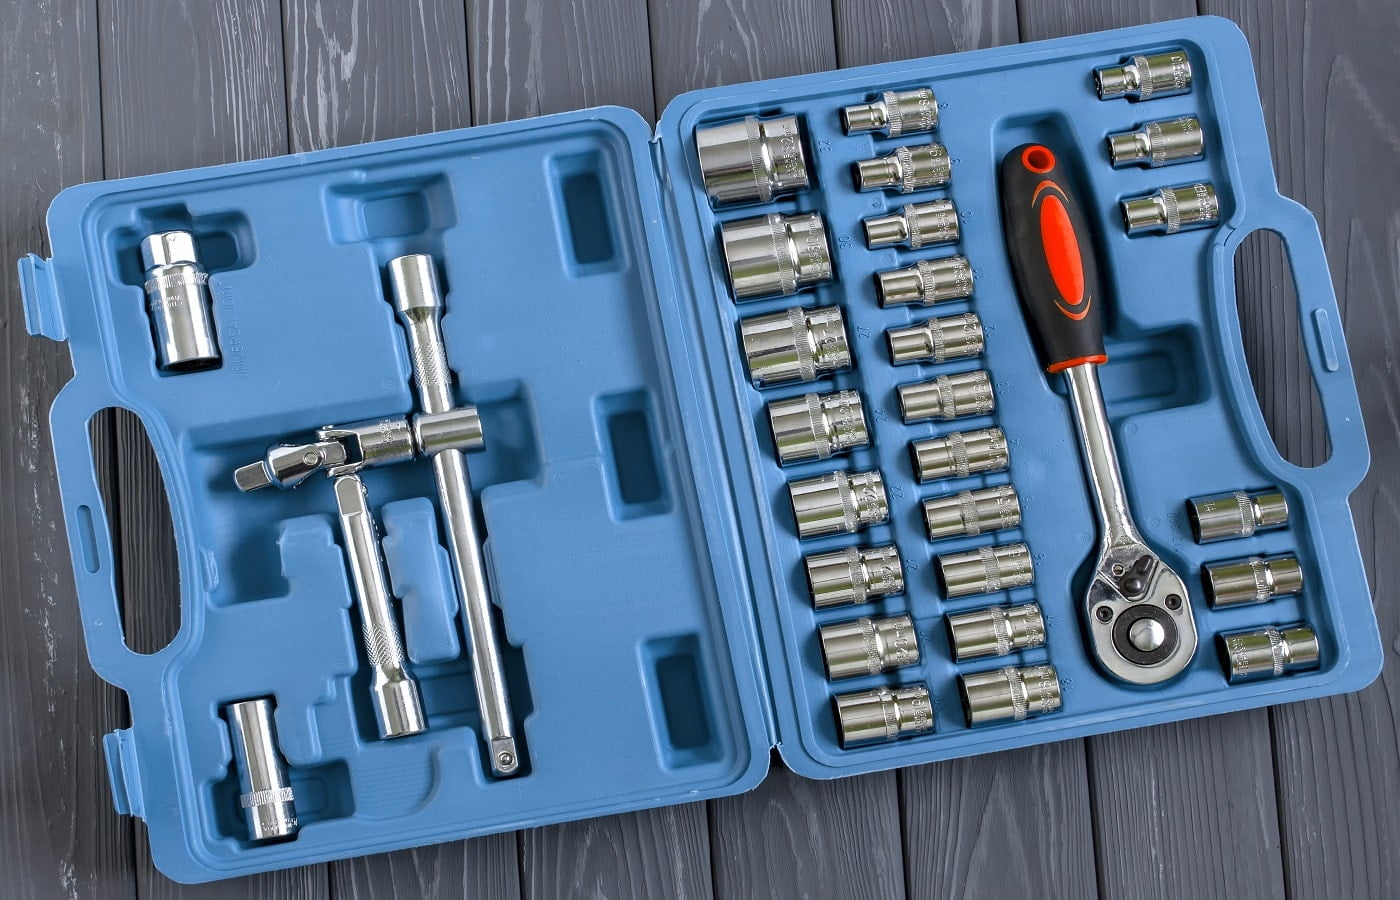 A set of socket wrenches in a convenient case. Top view. Wooden gray background.